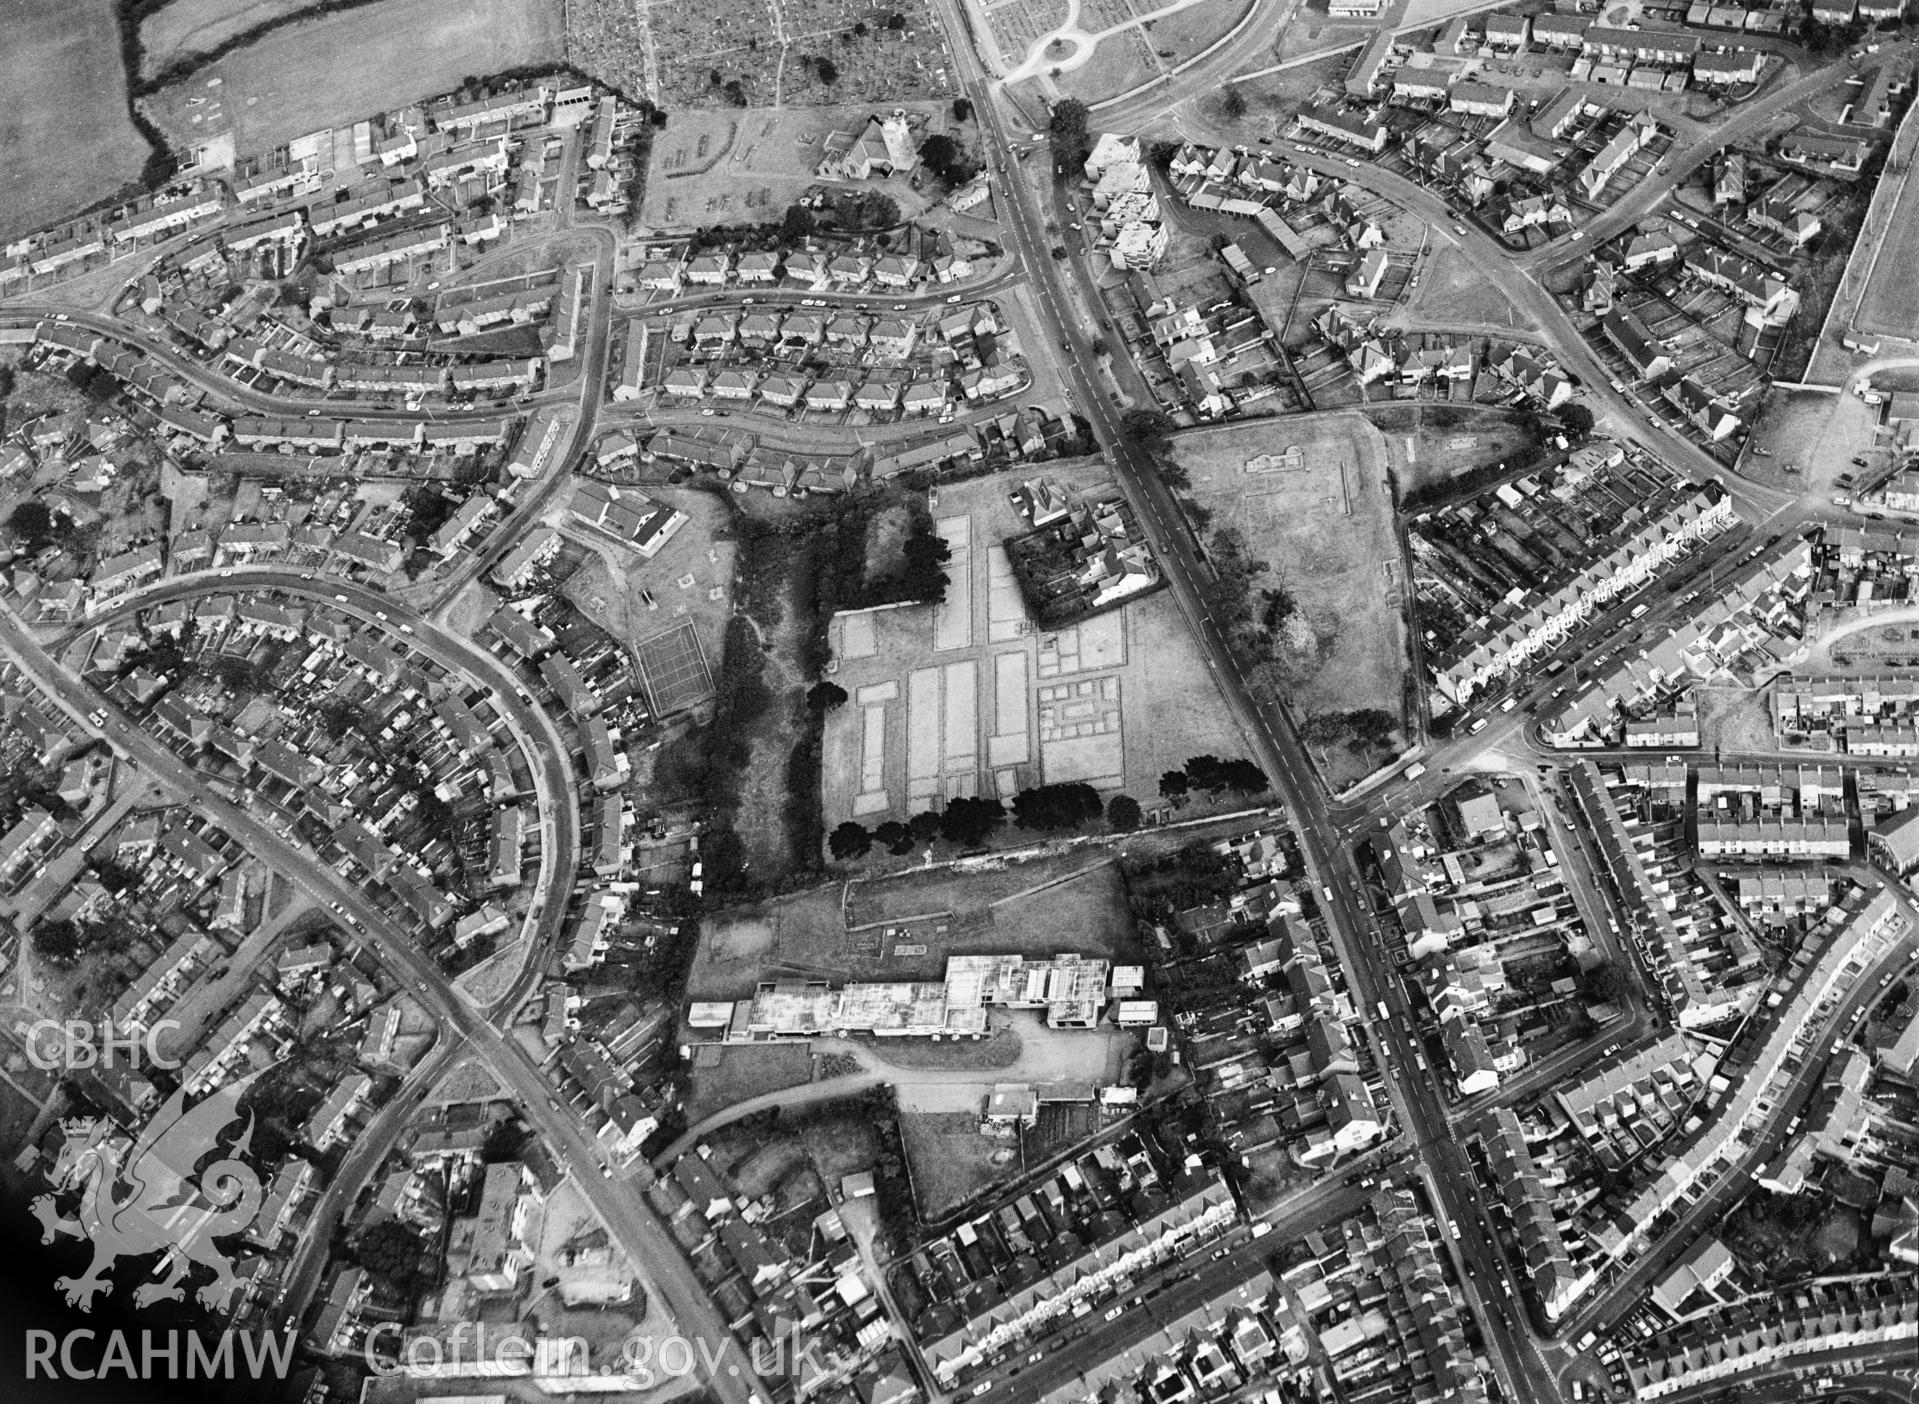 RCAHMW Black and white oblique aerial photograph of Caernarfon, taken on 1990 by C.R. Musson.